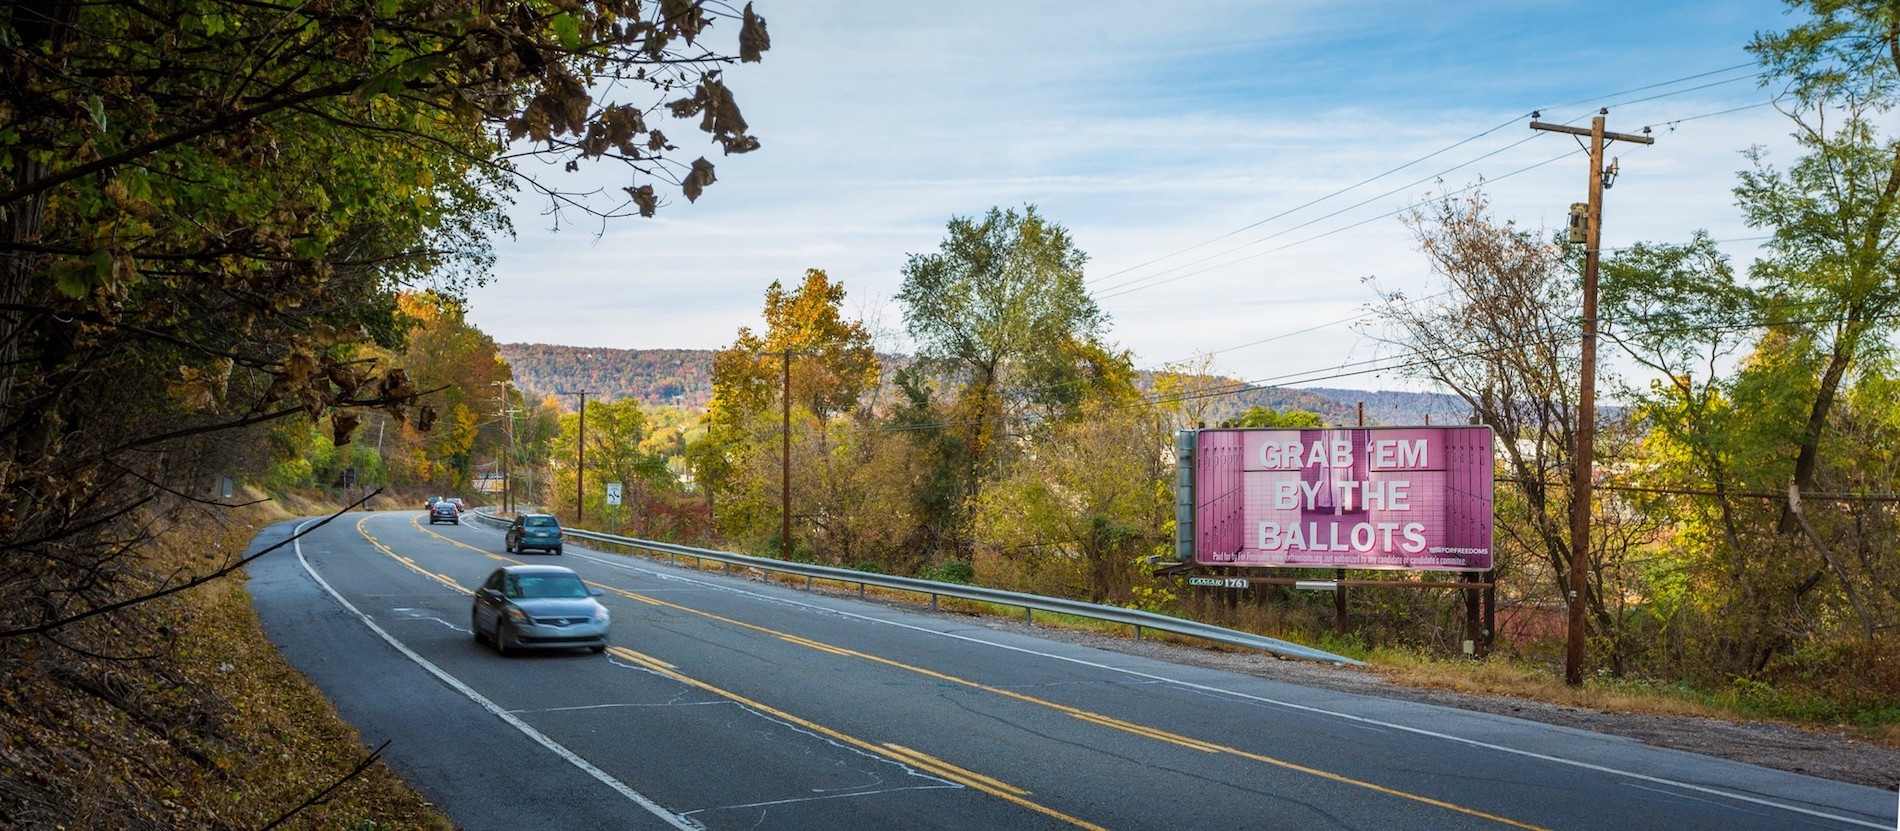 “Grab ’Em by the Ballots,” a billboard created by Zoë Buckman and For Freedoms in Harrisburg, Pa., in 2016. Courtesy of For Freedoms